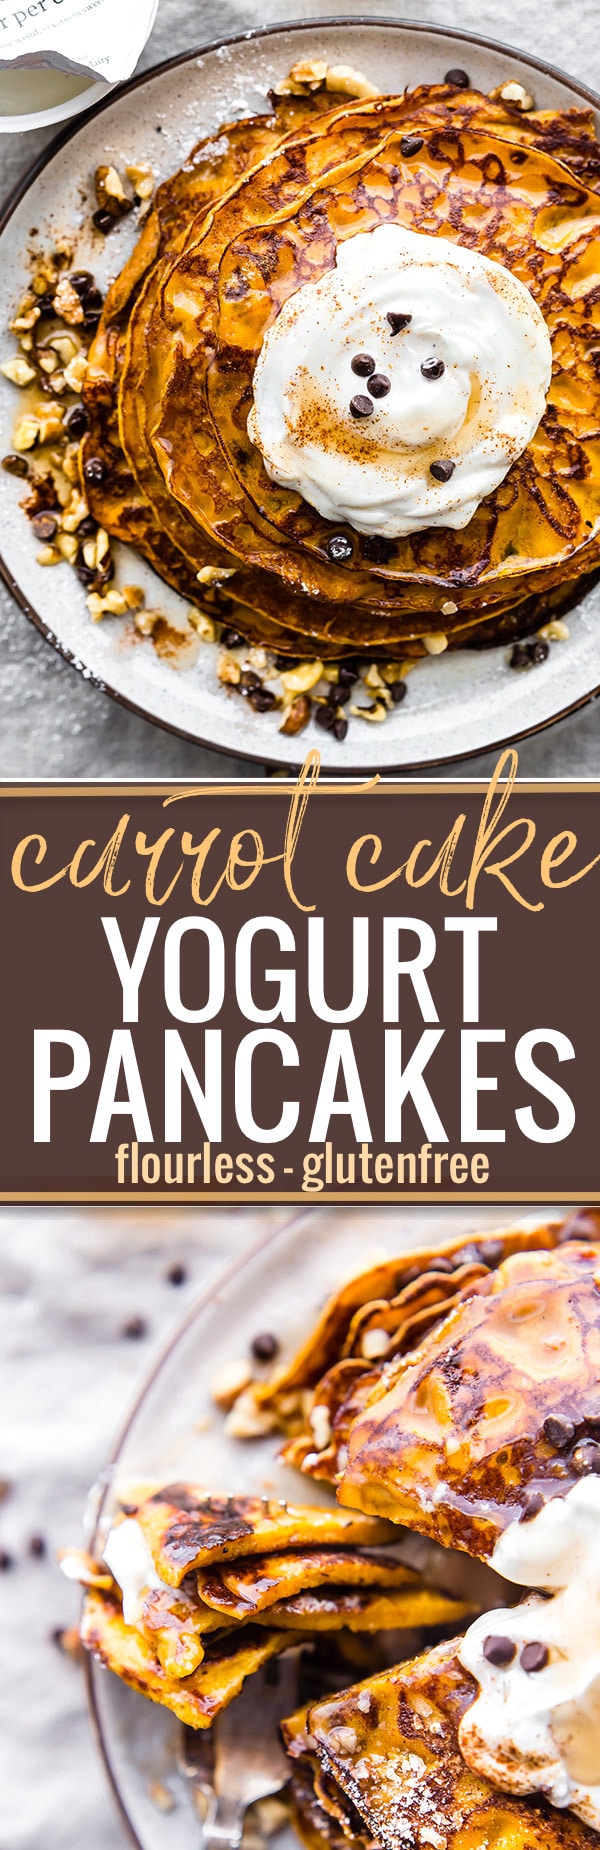 A Flourless Carrot Cake Yogurt Pancakes recipe that’s perfect for breakfast or brunch. These Flourless Carrot Cake Yogurt Pancakes are too good to be true! Made with siggi’s vanilla yogurt, making them lower in sugar, gluten free, and protein packed! An easy blender recipe. @siggisdairy #sponsored